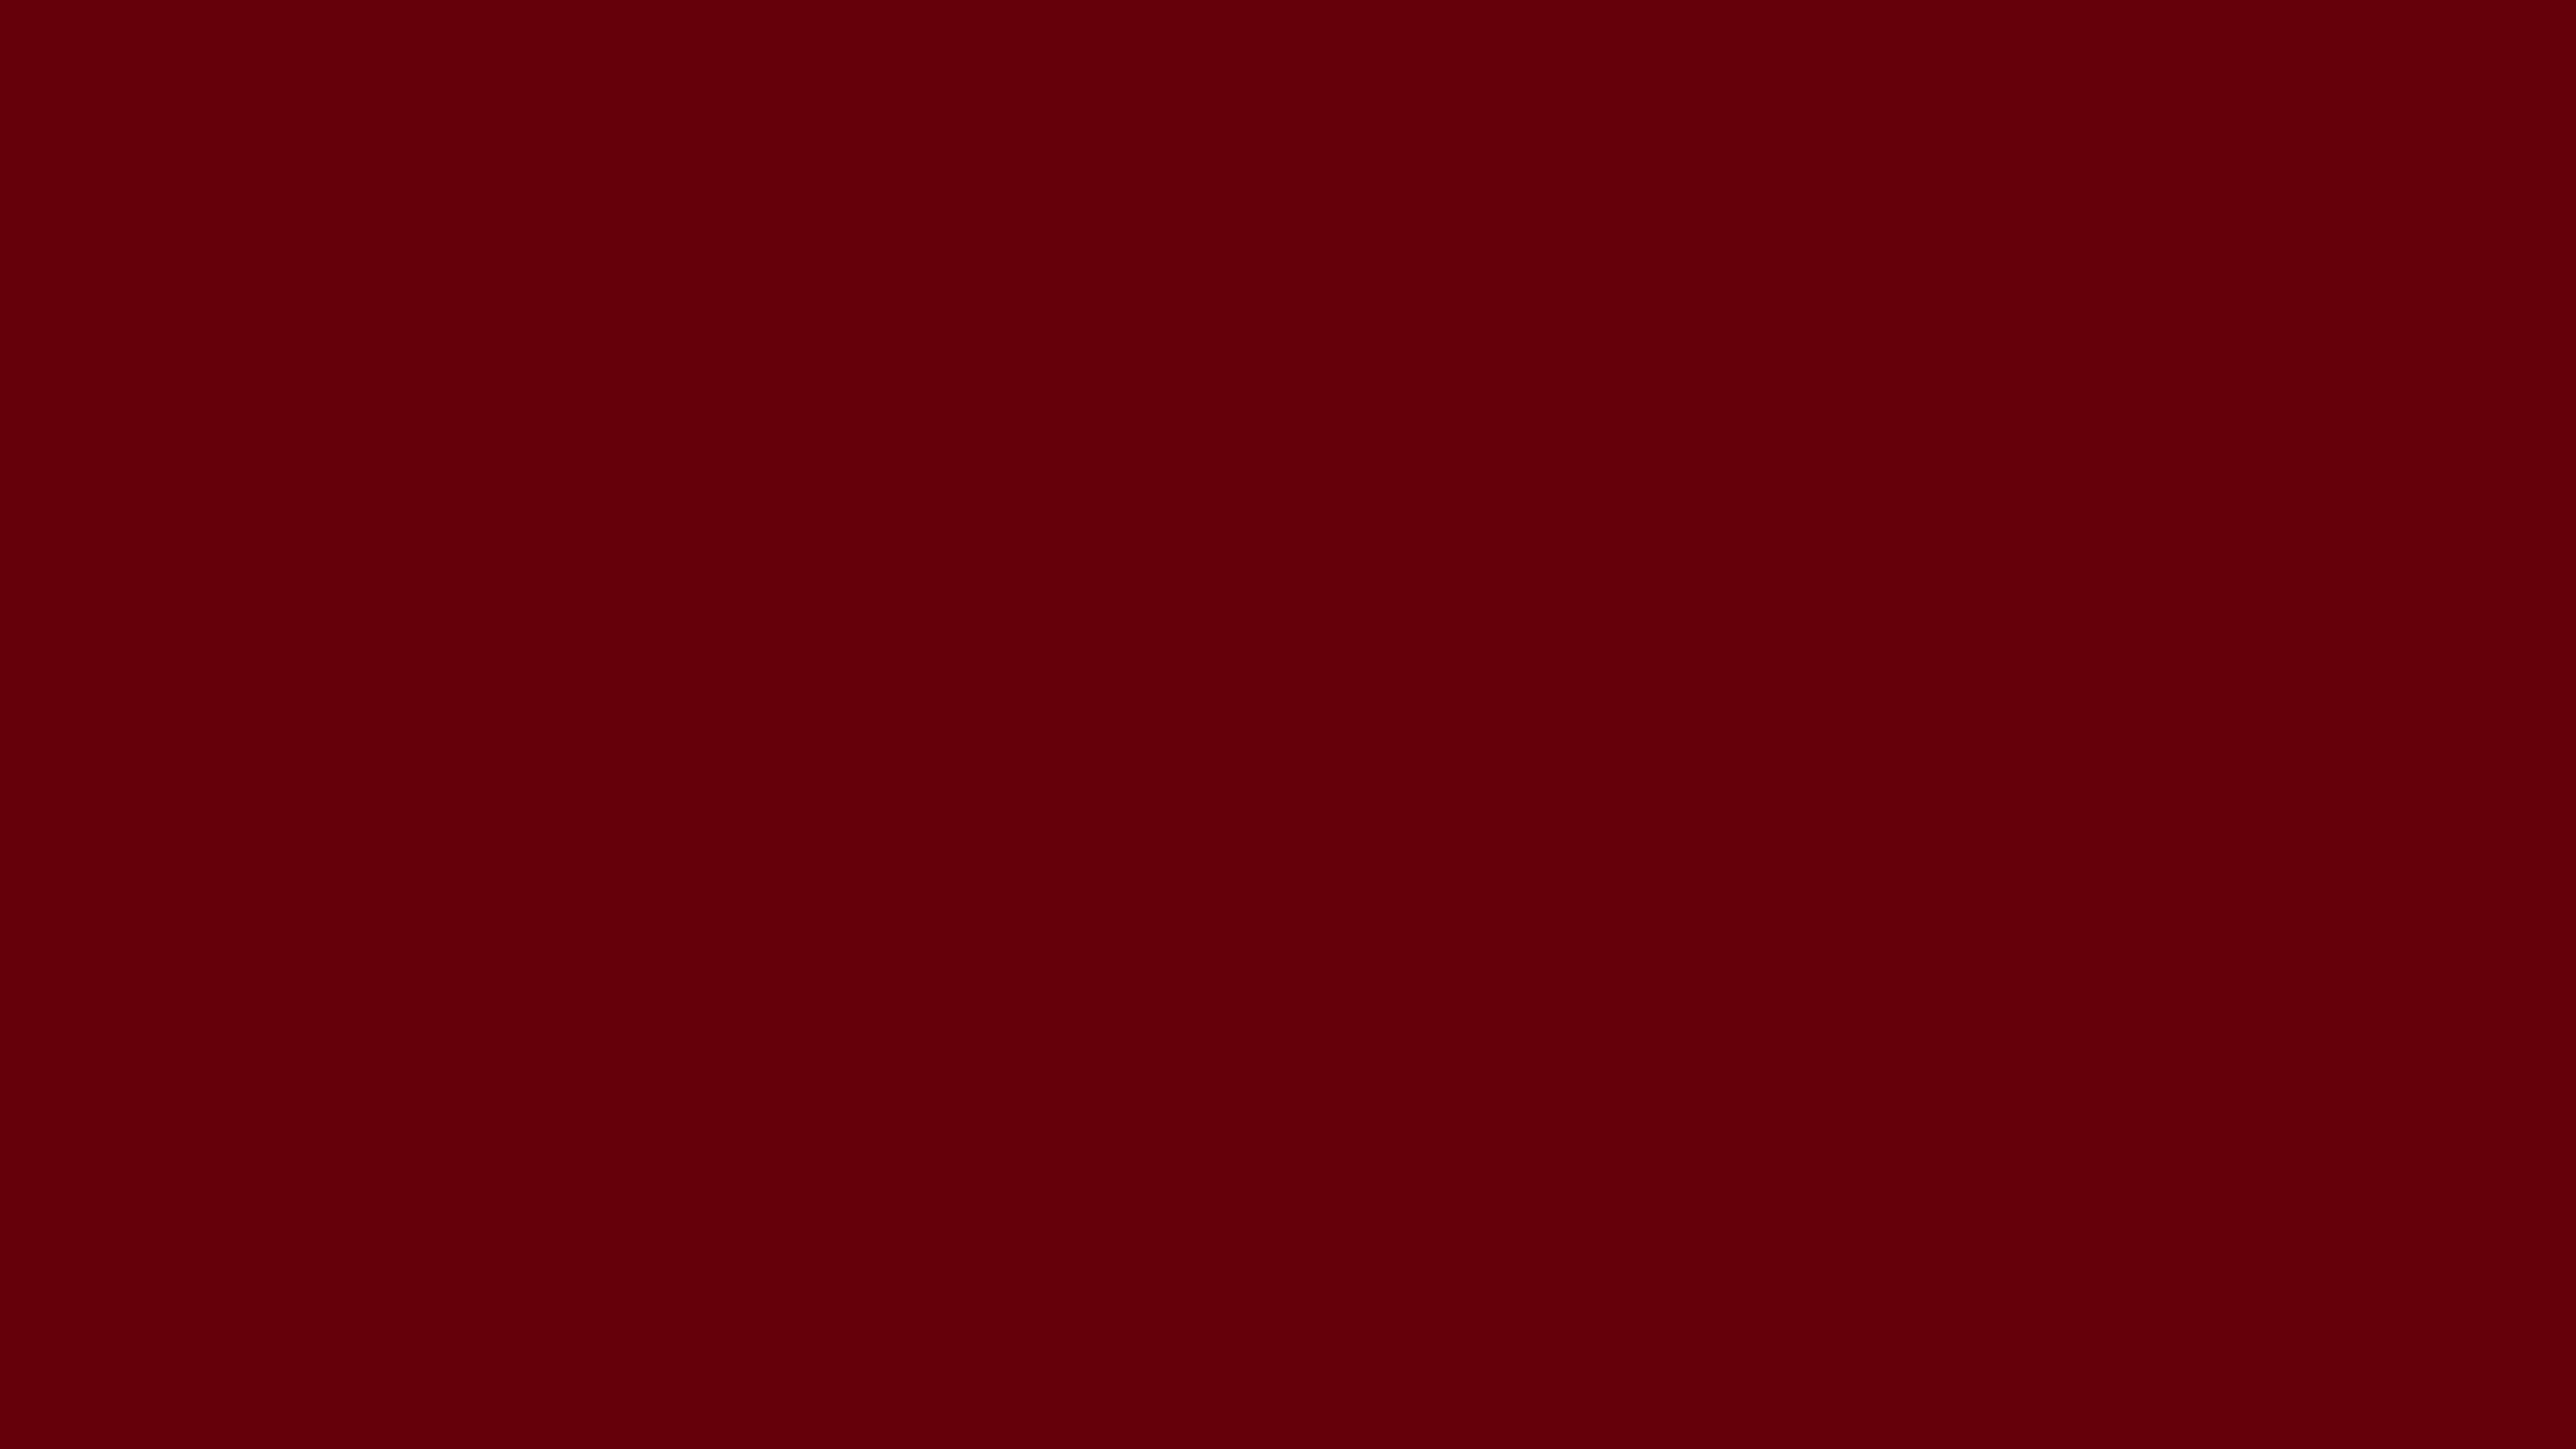 7680x4320 Rosewood Solid Color Background